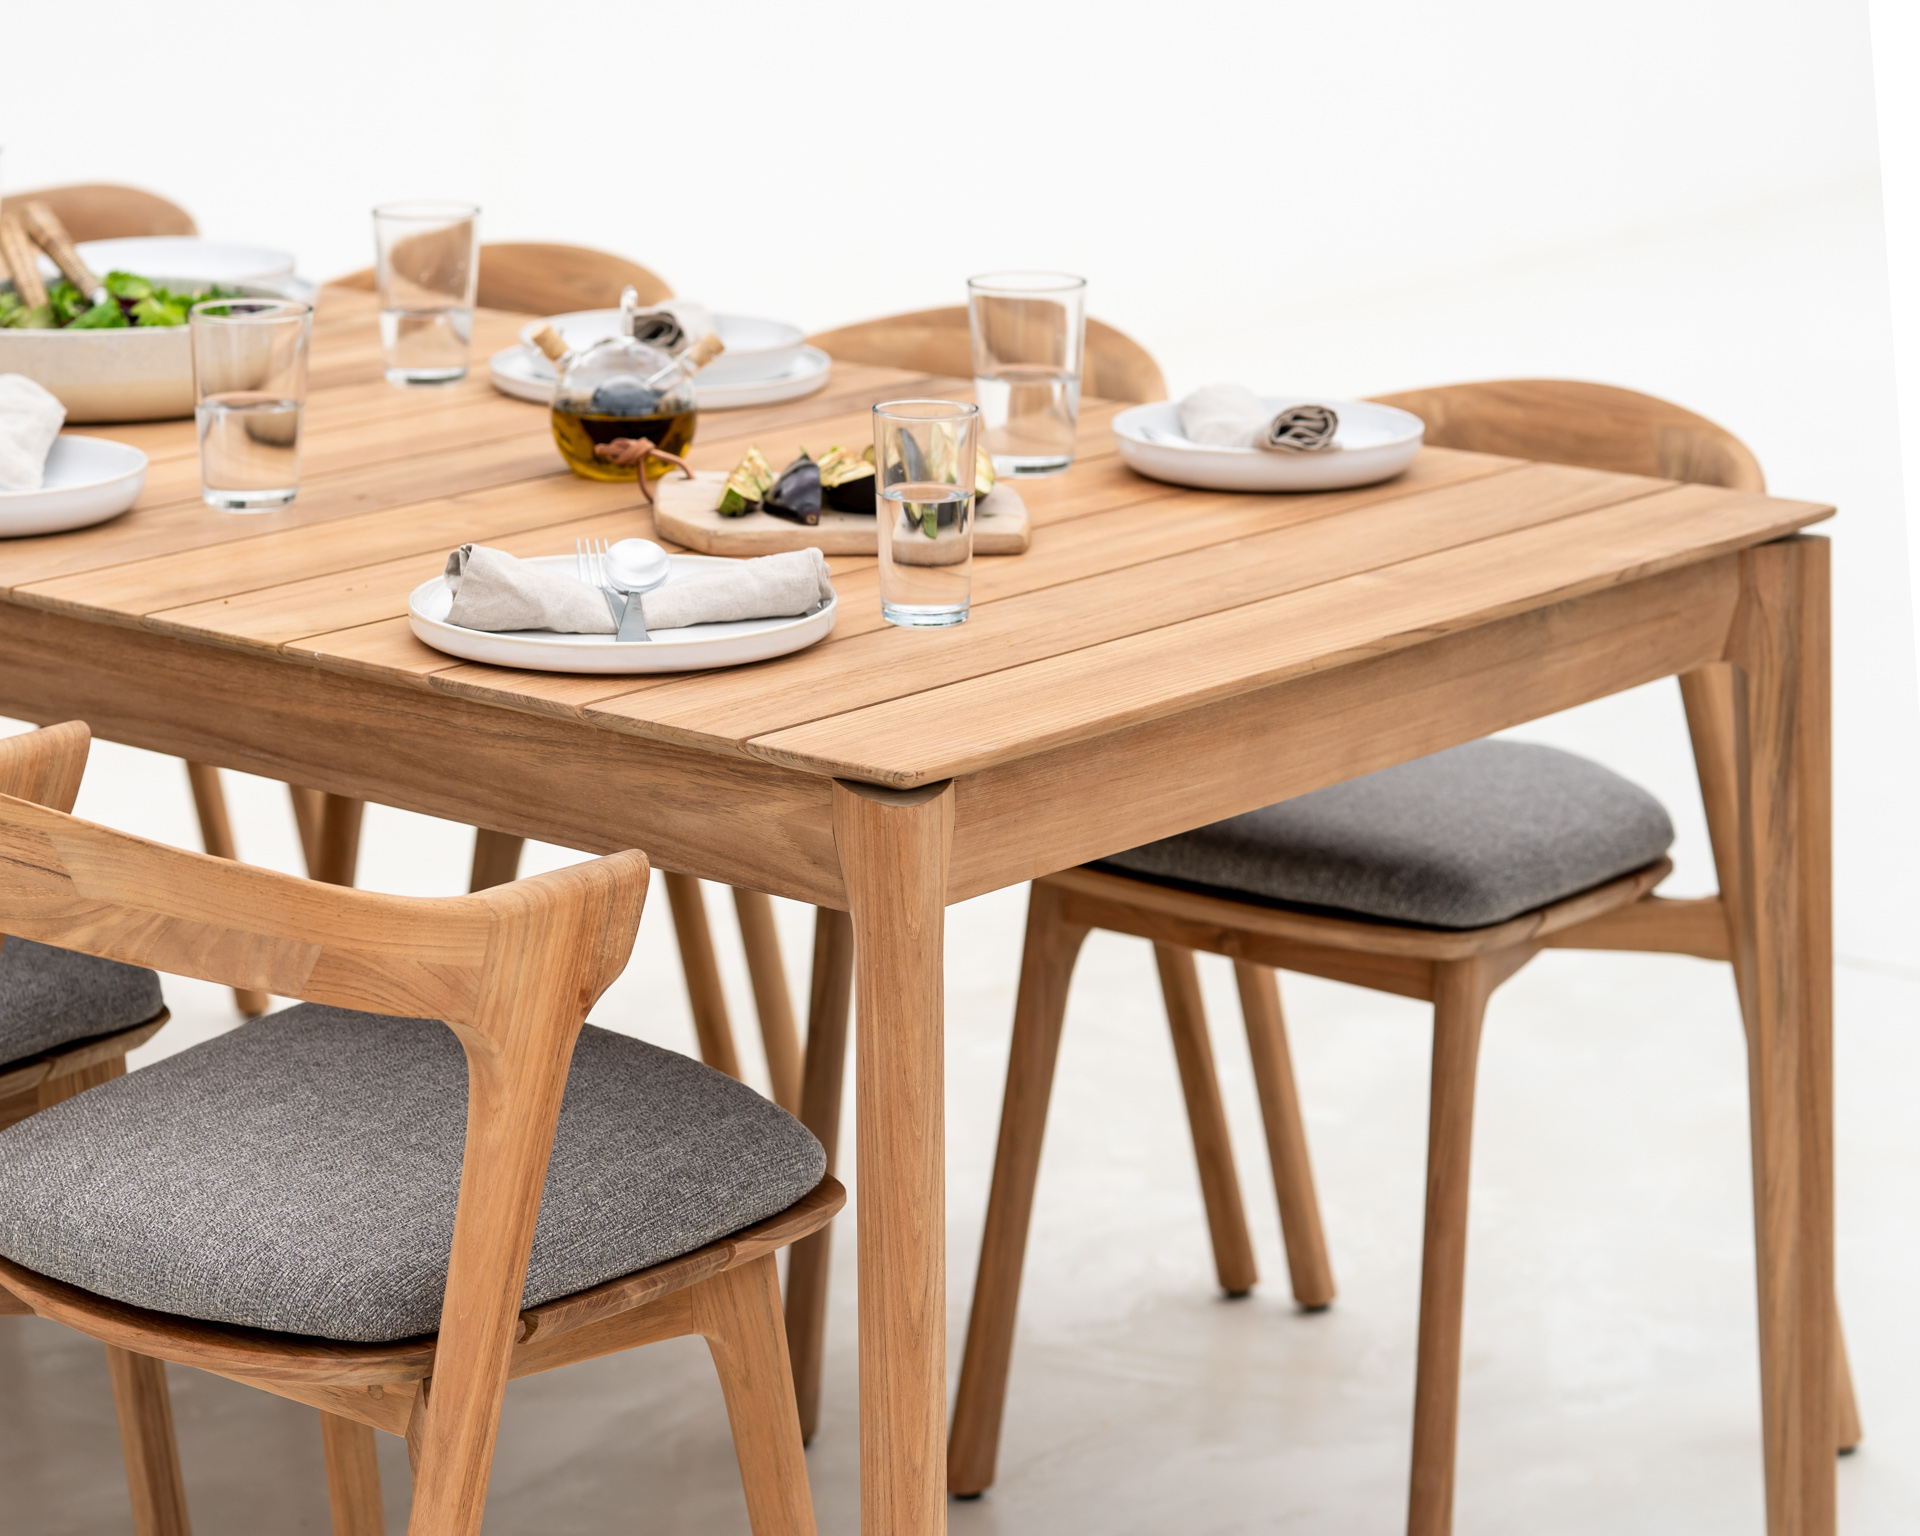 The Importance Of Ethically-Sourced Furniture